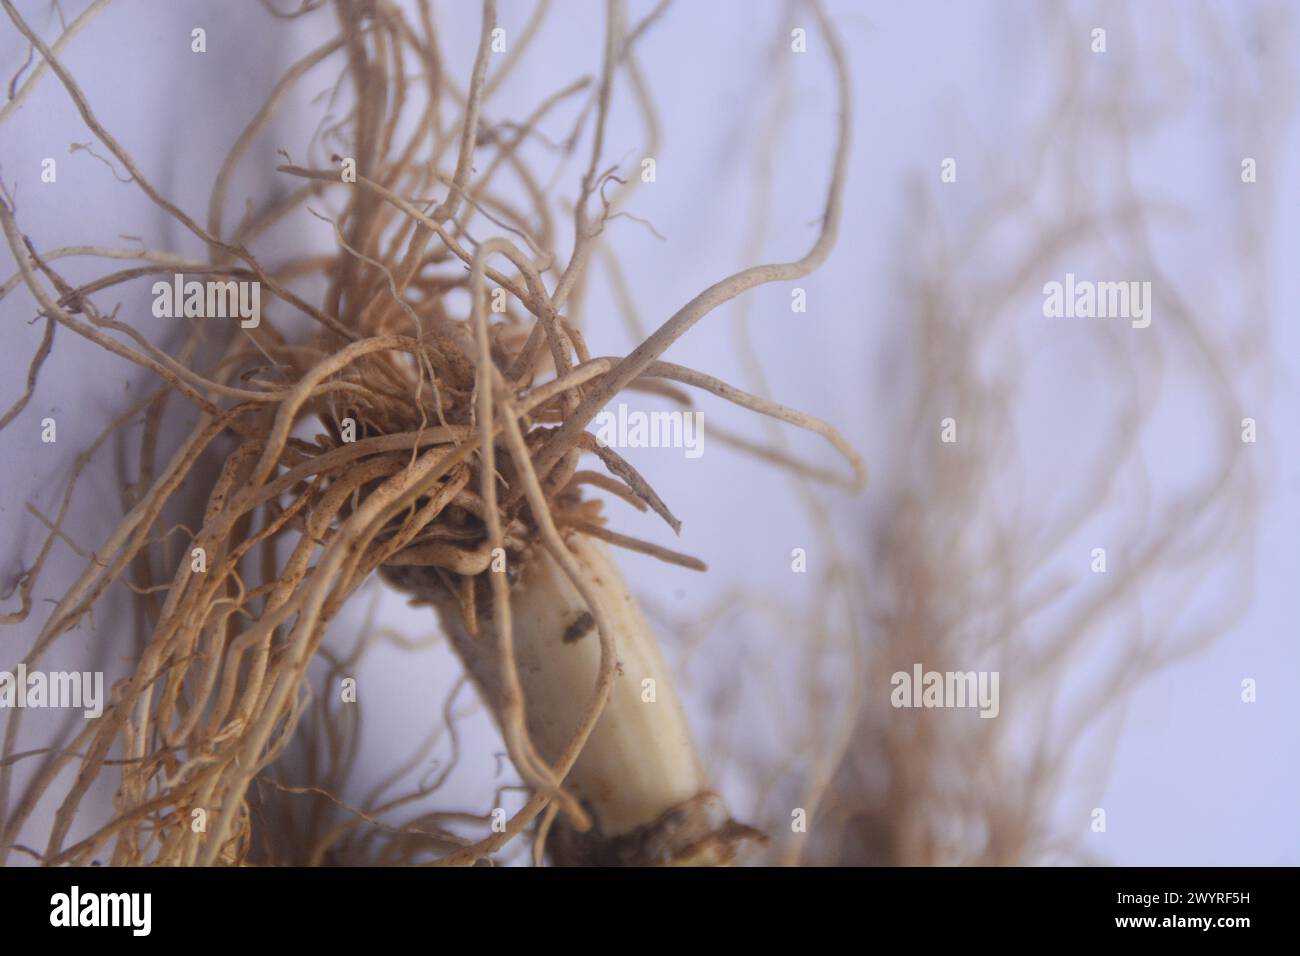 close up view of the root of leeks, has fibrous roots. The roots of leeks that have been taken and the remaining roots when soaked in water and then r Stock Photo